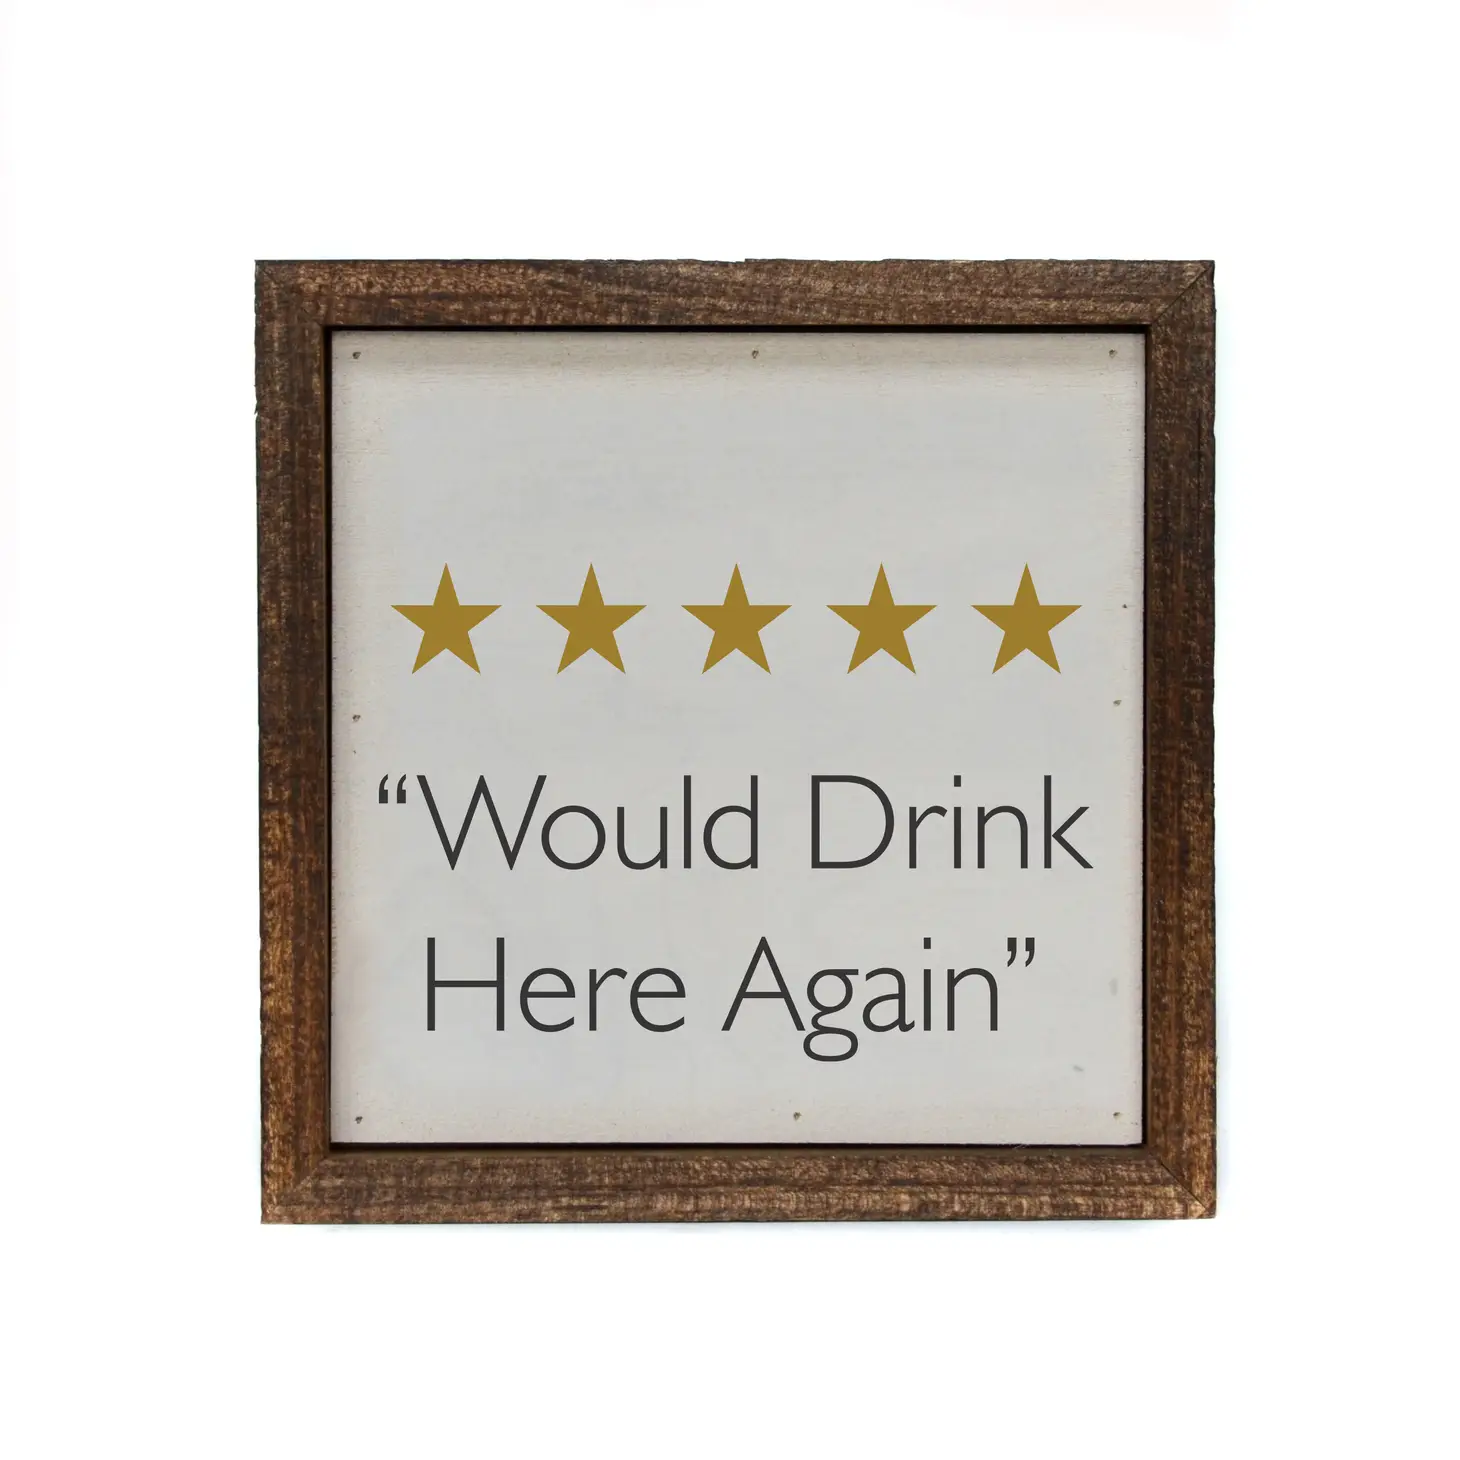 Would Drink Here Again 6x6 Box Sign